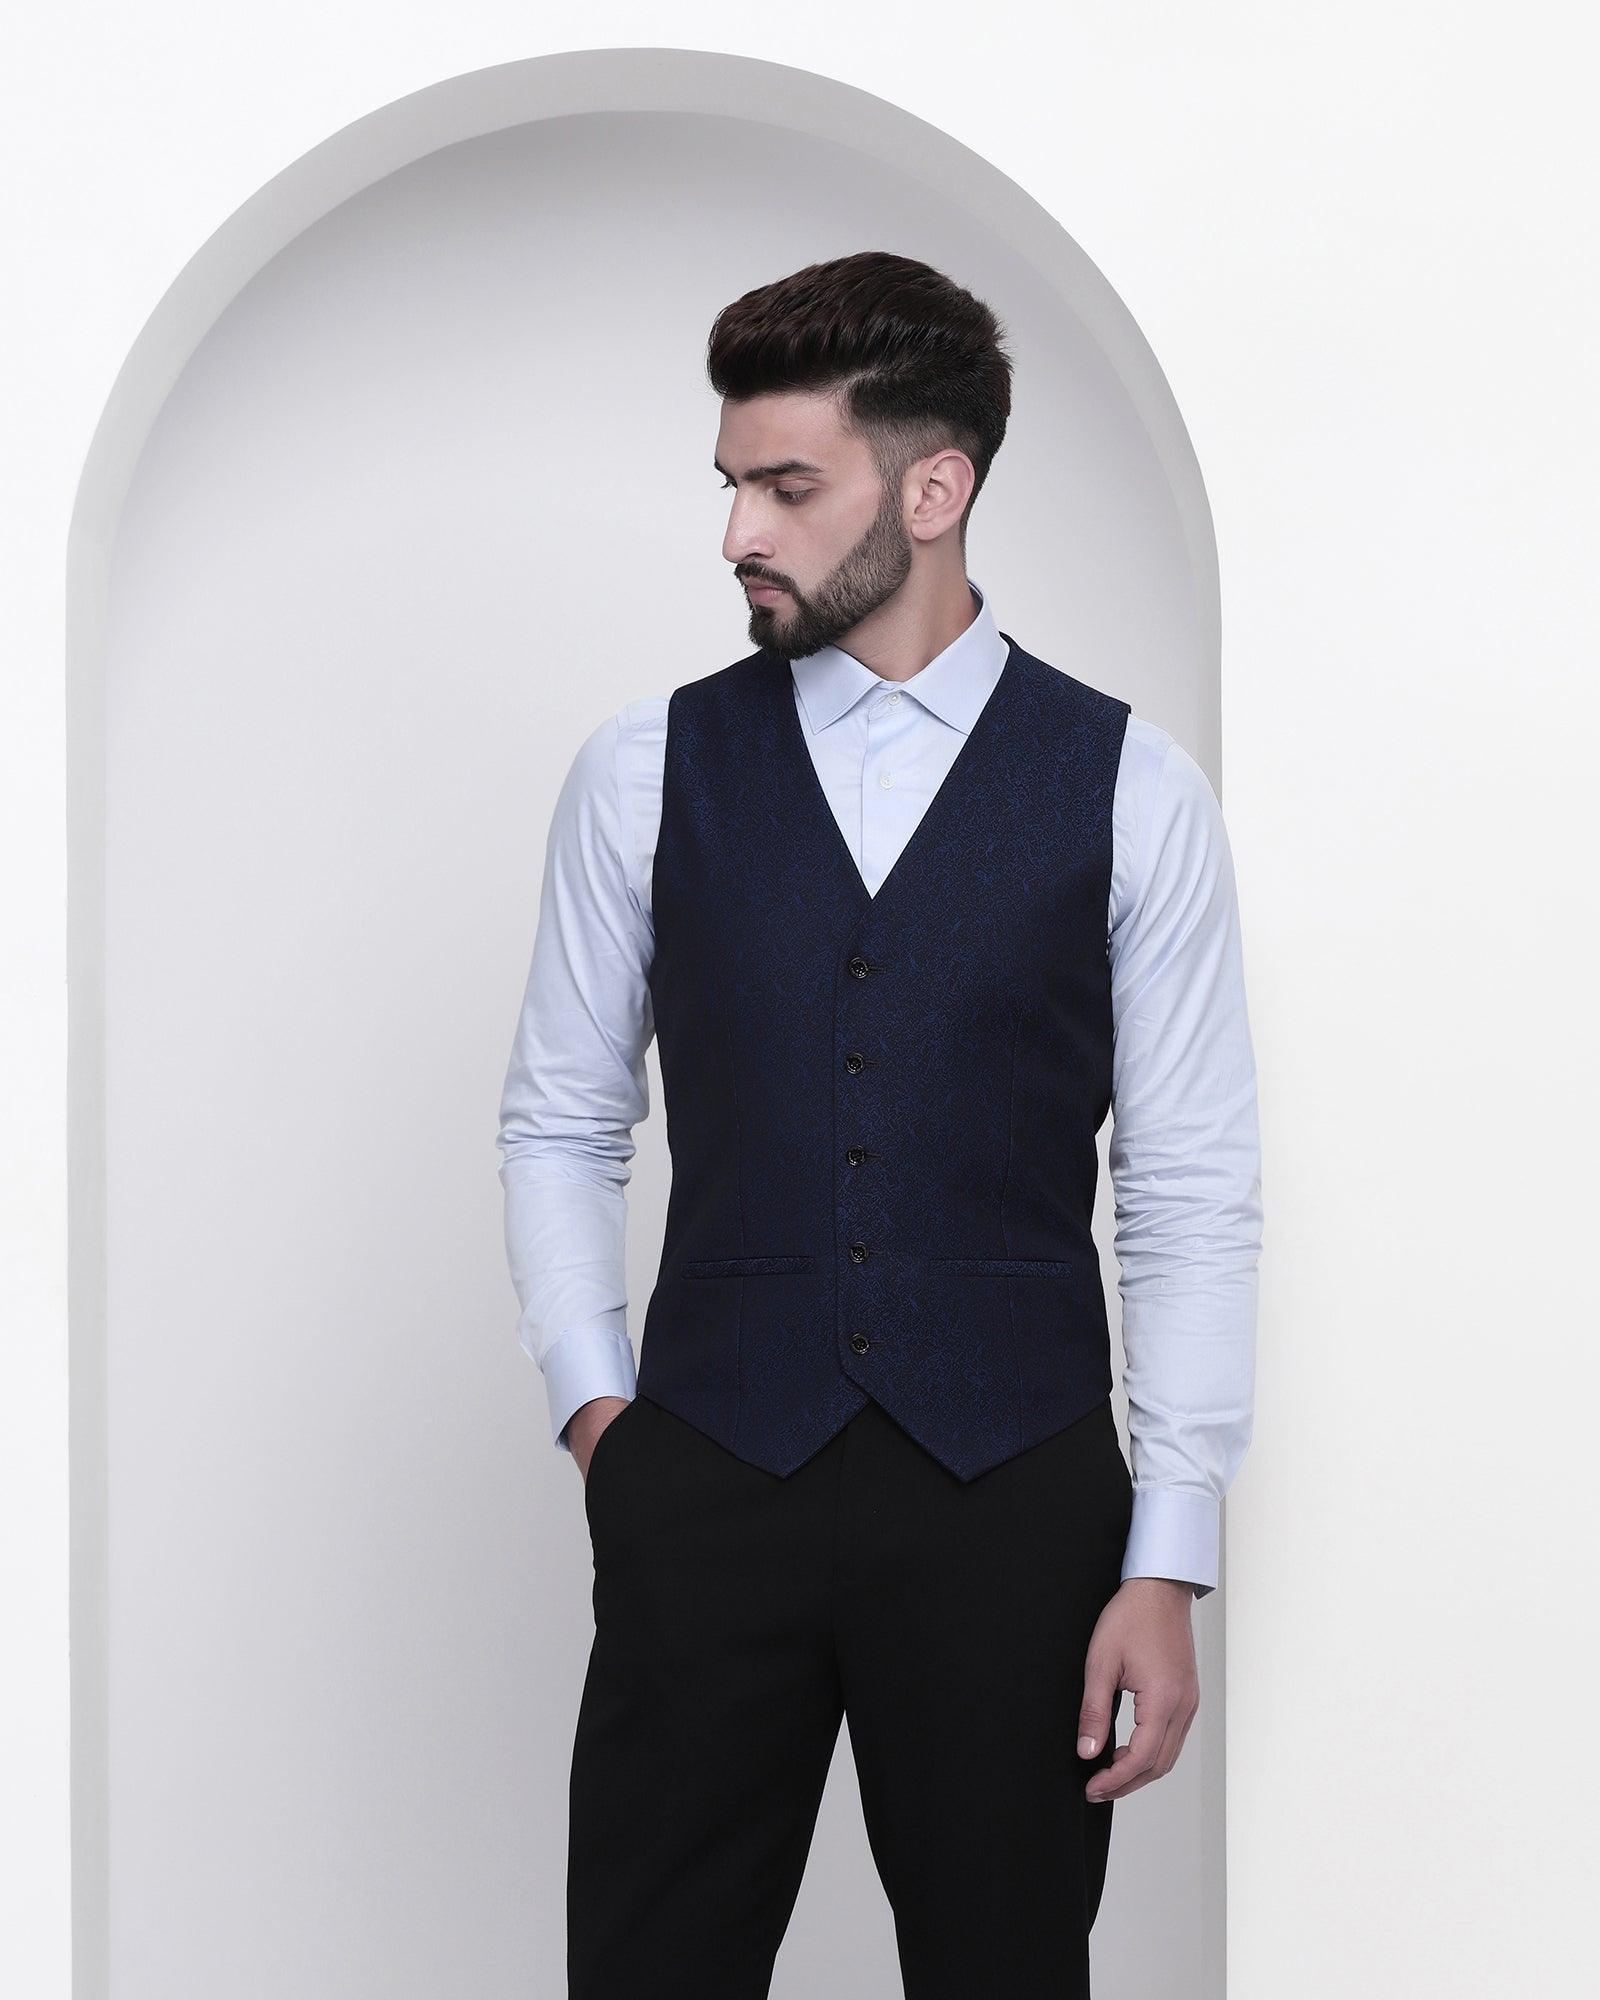 Which colour waistcoat should I wear with a blue shirt and grey trousers   Quora